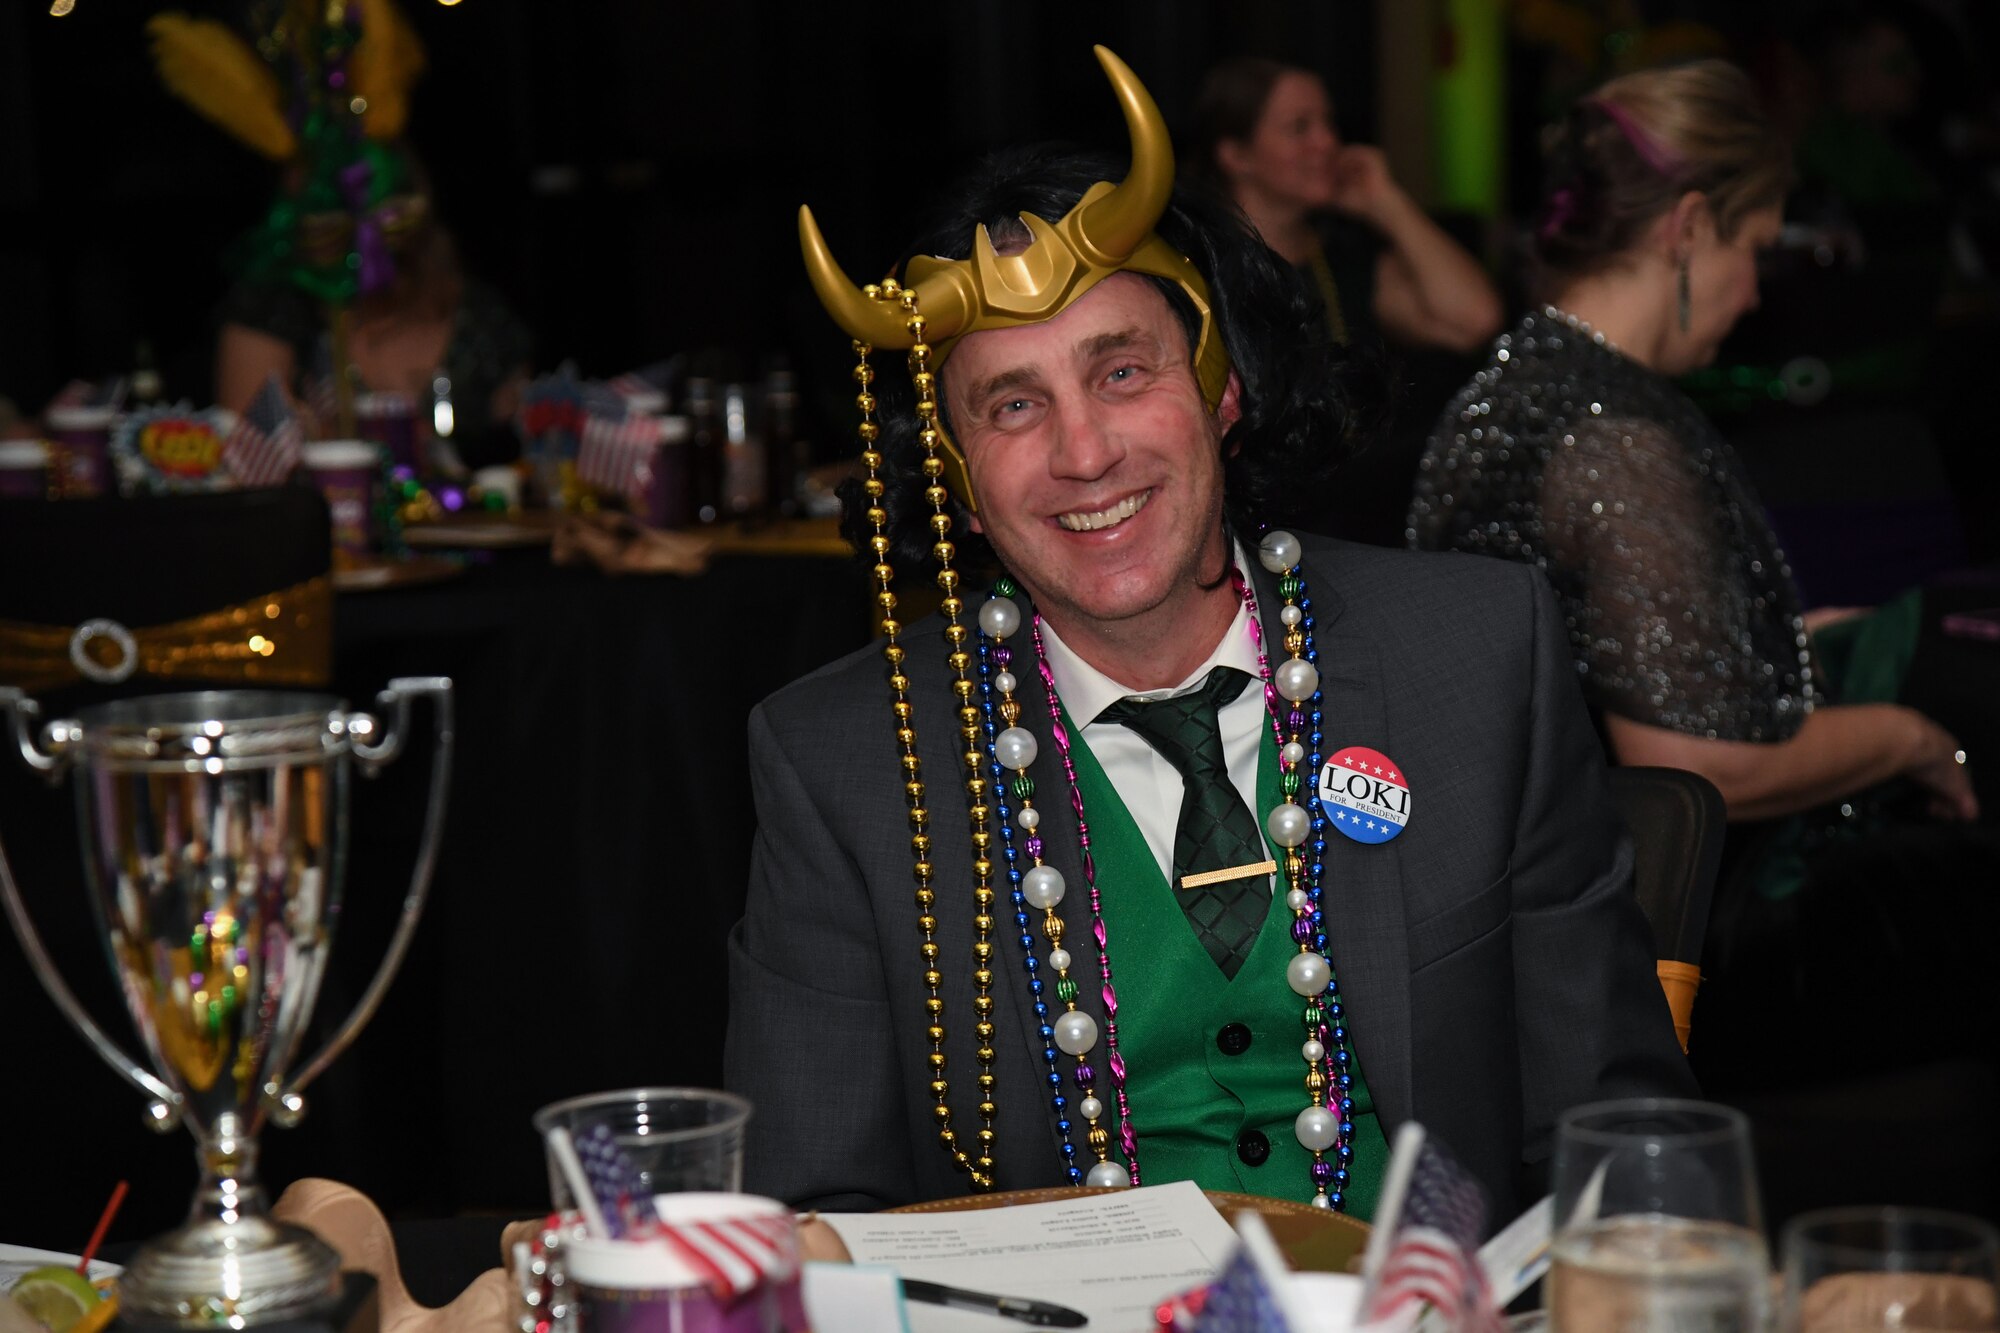 U.S. Air Force Col. Christopher Estridge, 81st Medical Group commander, attends the 32nd Annual Krewe of Medics Mardi Gras Ball at the Bay Breeze Event Center on Keesler Air Force Base, Mississippi, Feb. 11, 2023.